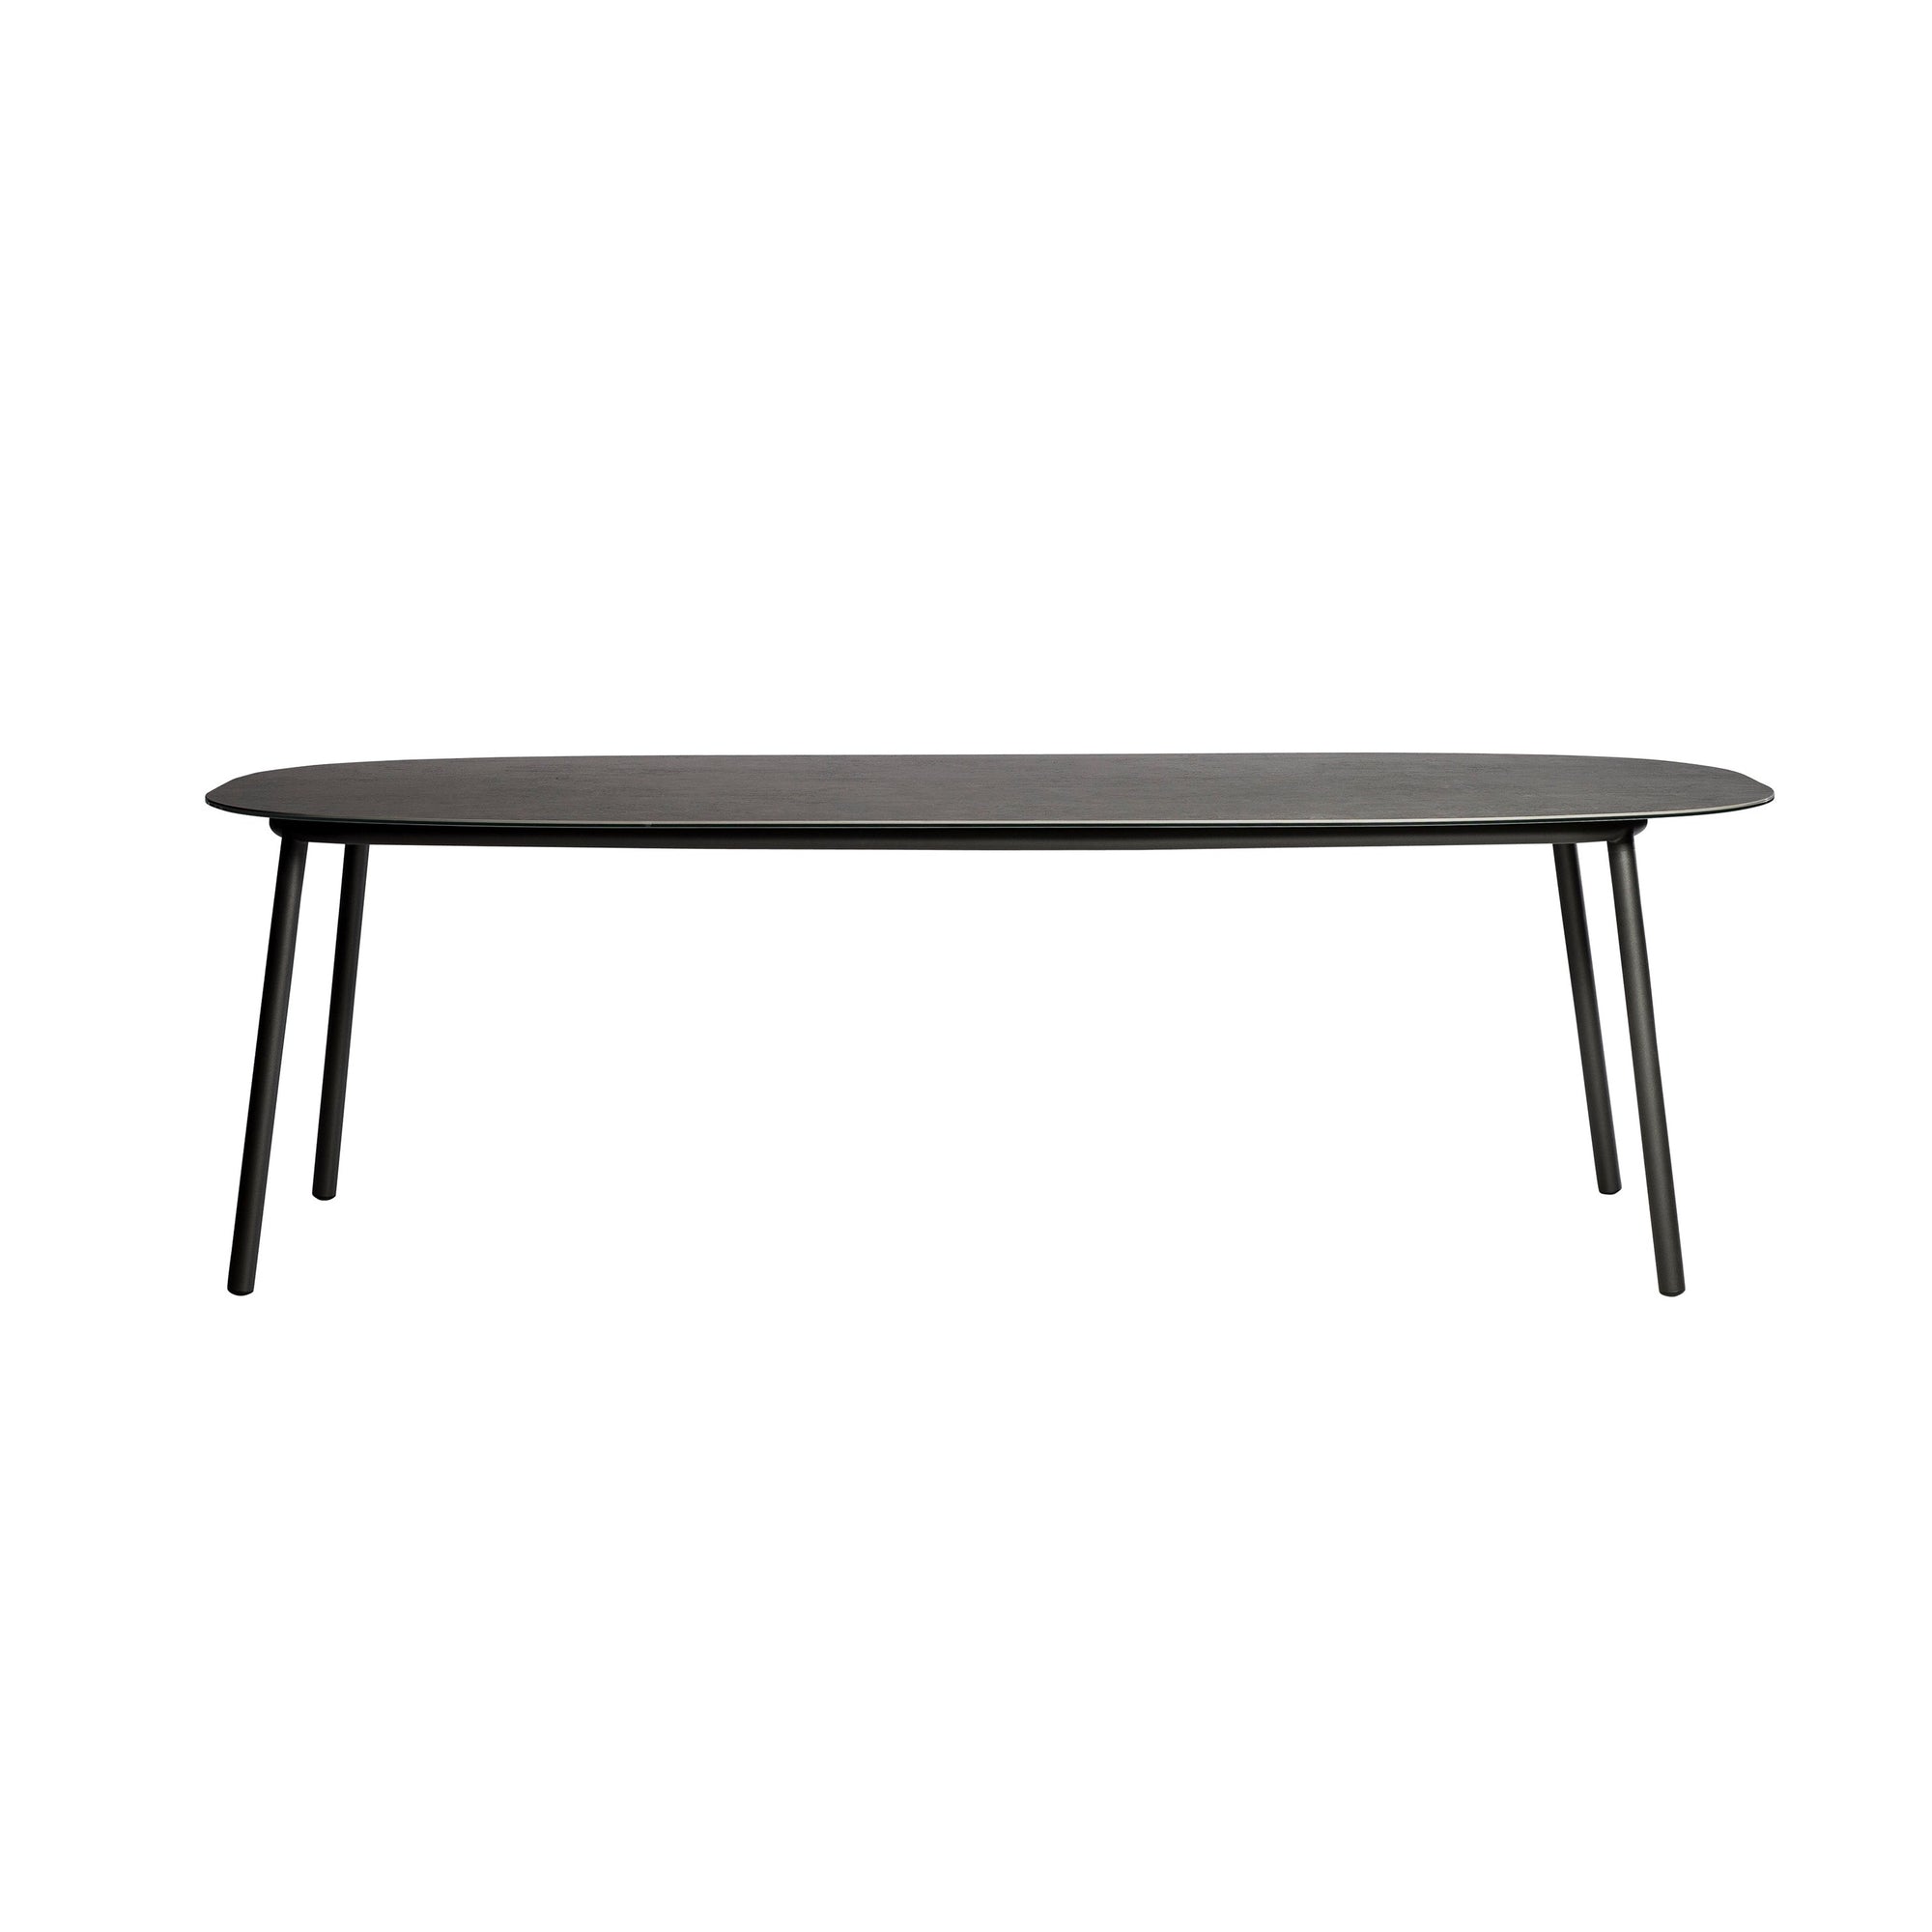 Tribù TOSCA low oval dining table 240 cm